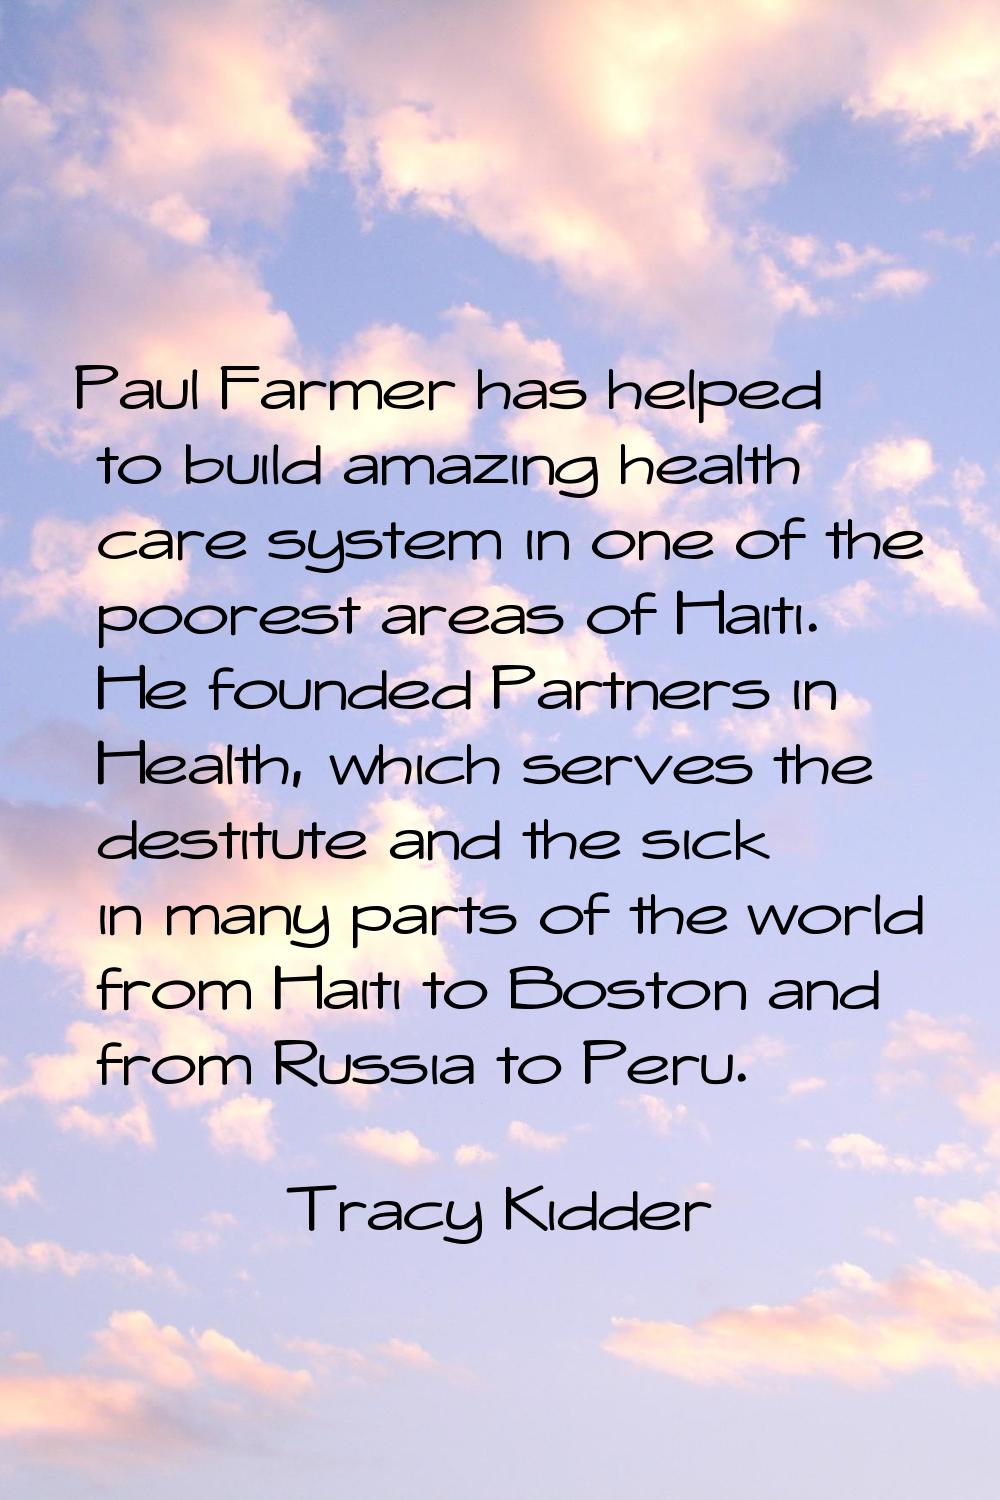 Paul Farmer has helped to build amazing health care system in one of the poorest areas of Haiti. He